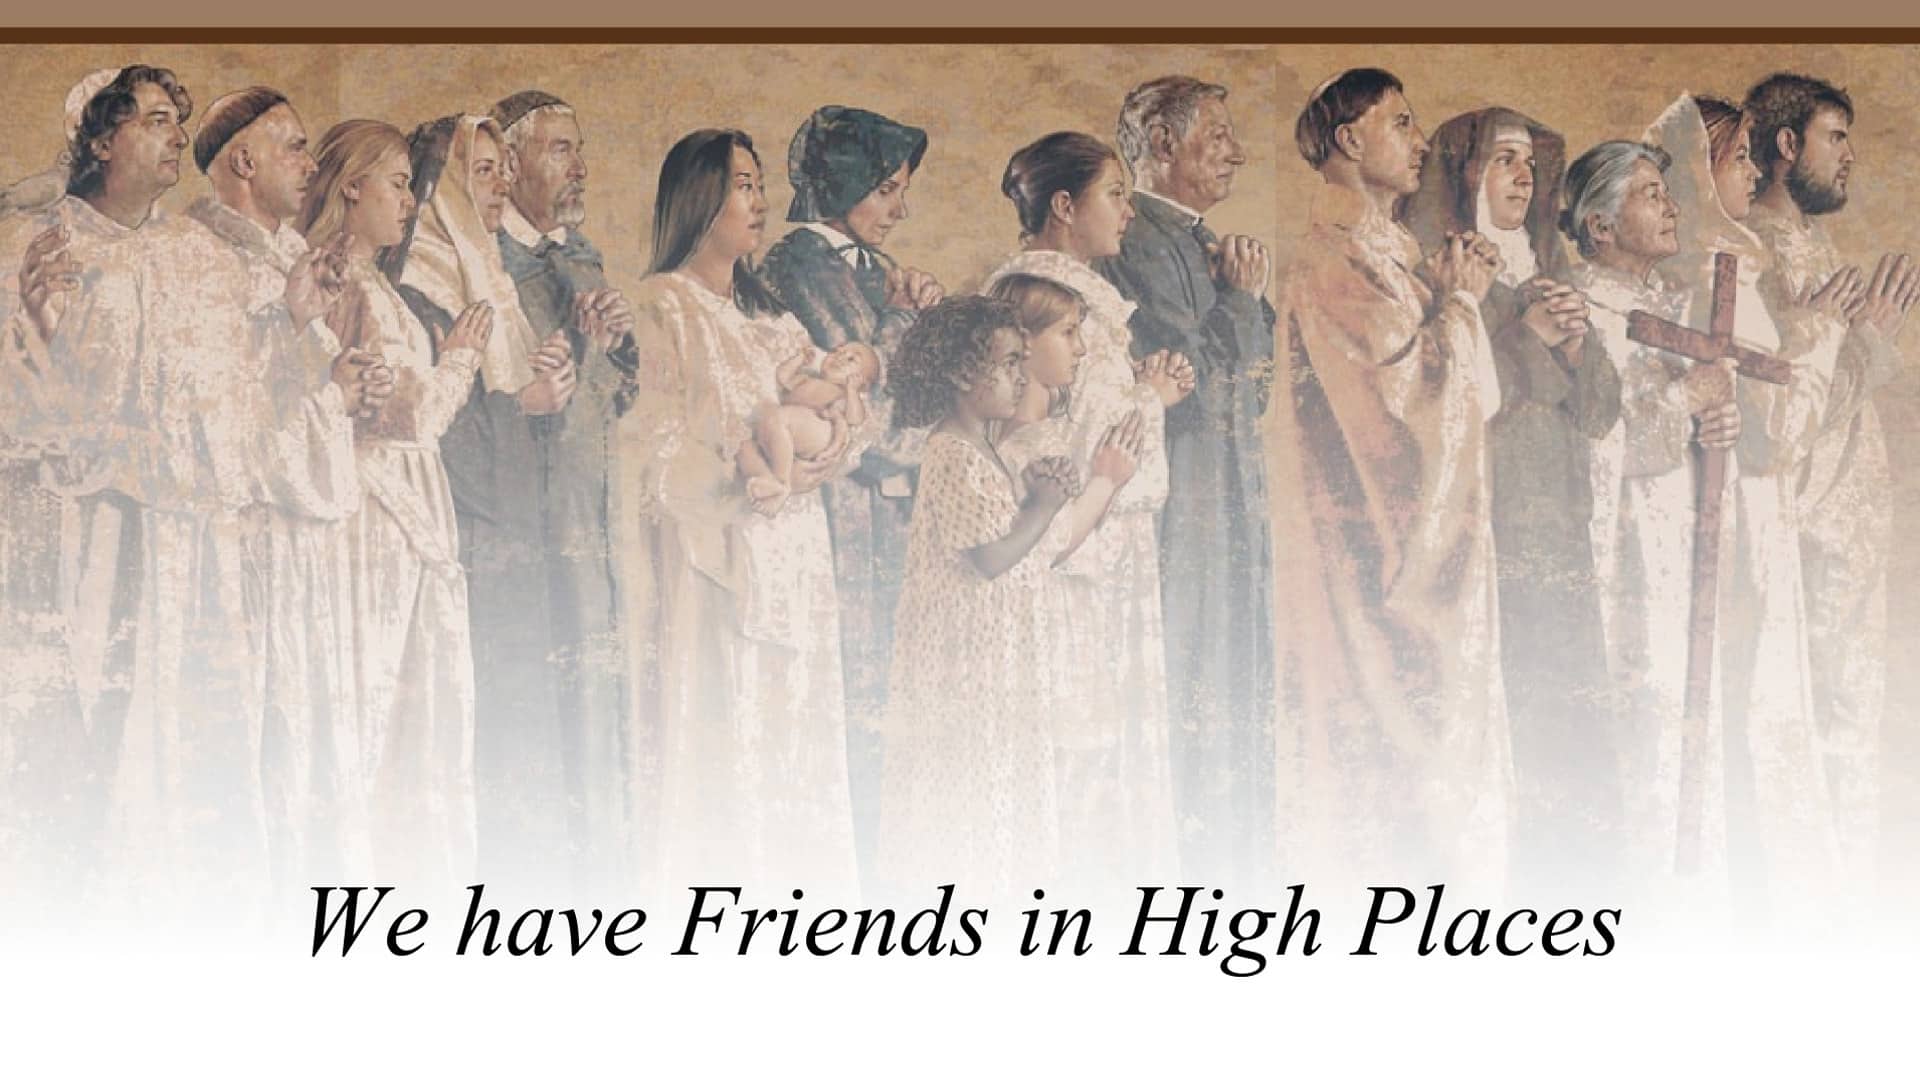 Wall covered in modern day Saints, 'We have Friends in High Places'